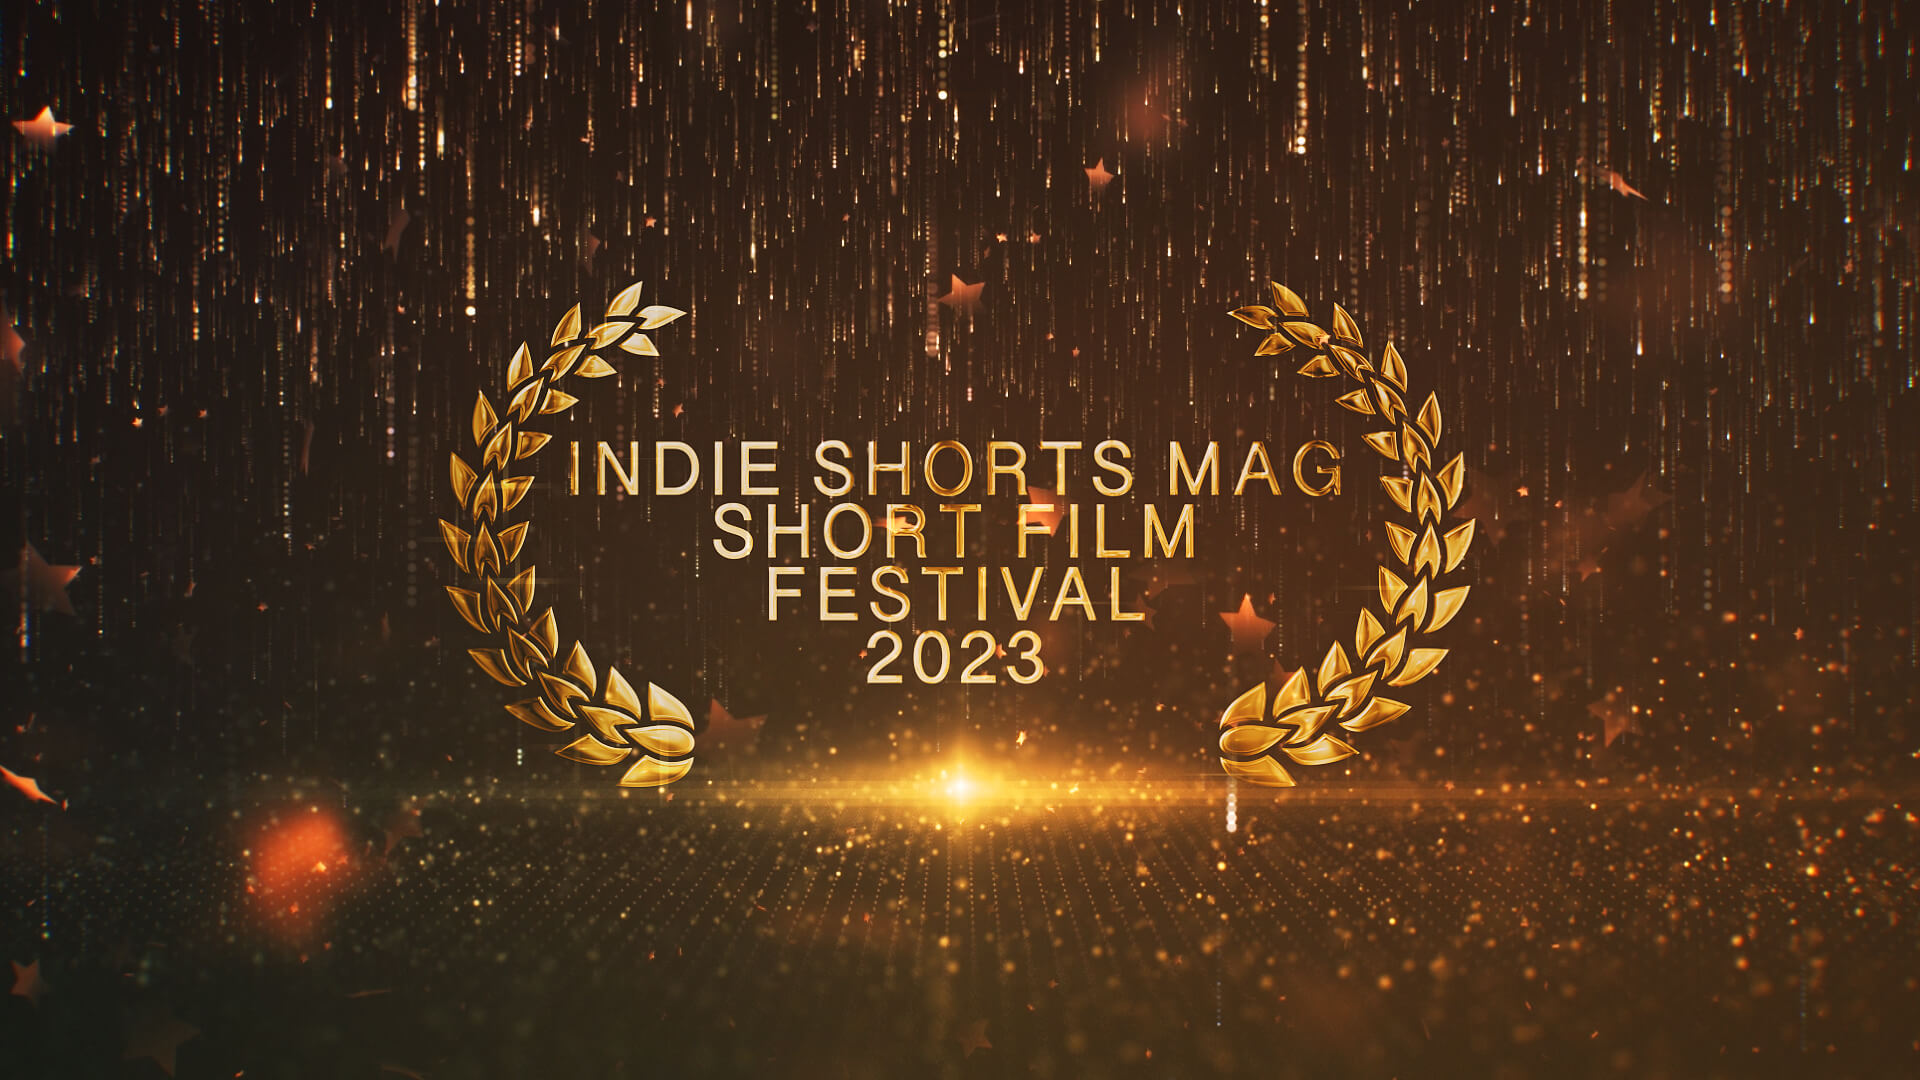 Announcing Indie Shorts Mag Short Film Festival(ISMSFF) 2023